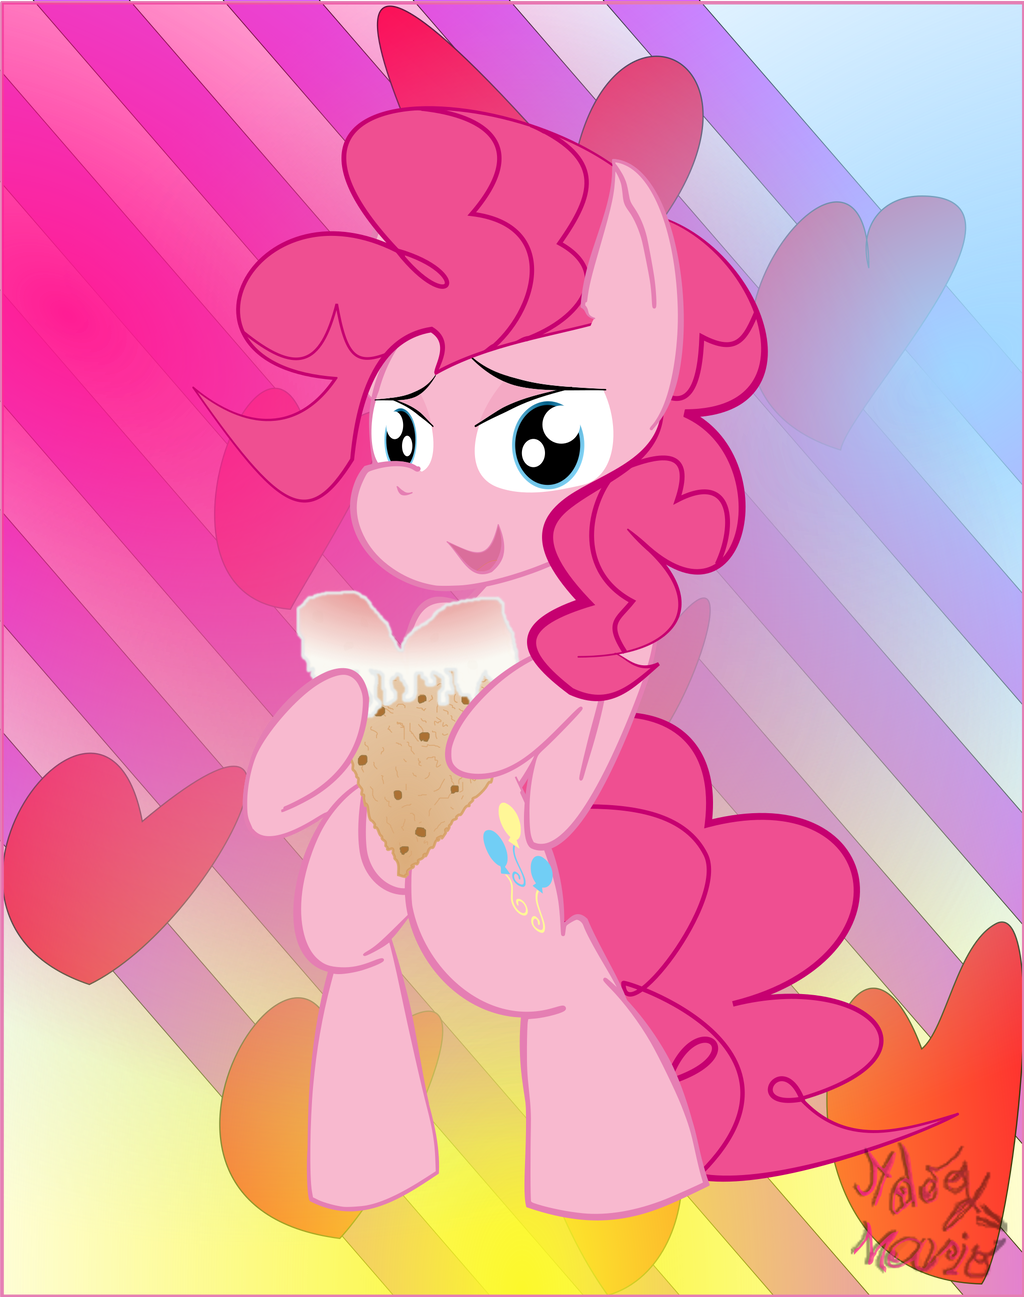  Pinkie's Sweet Affection